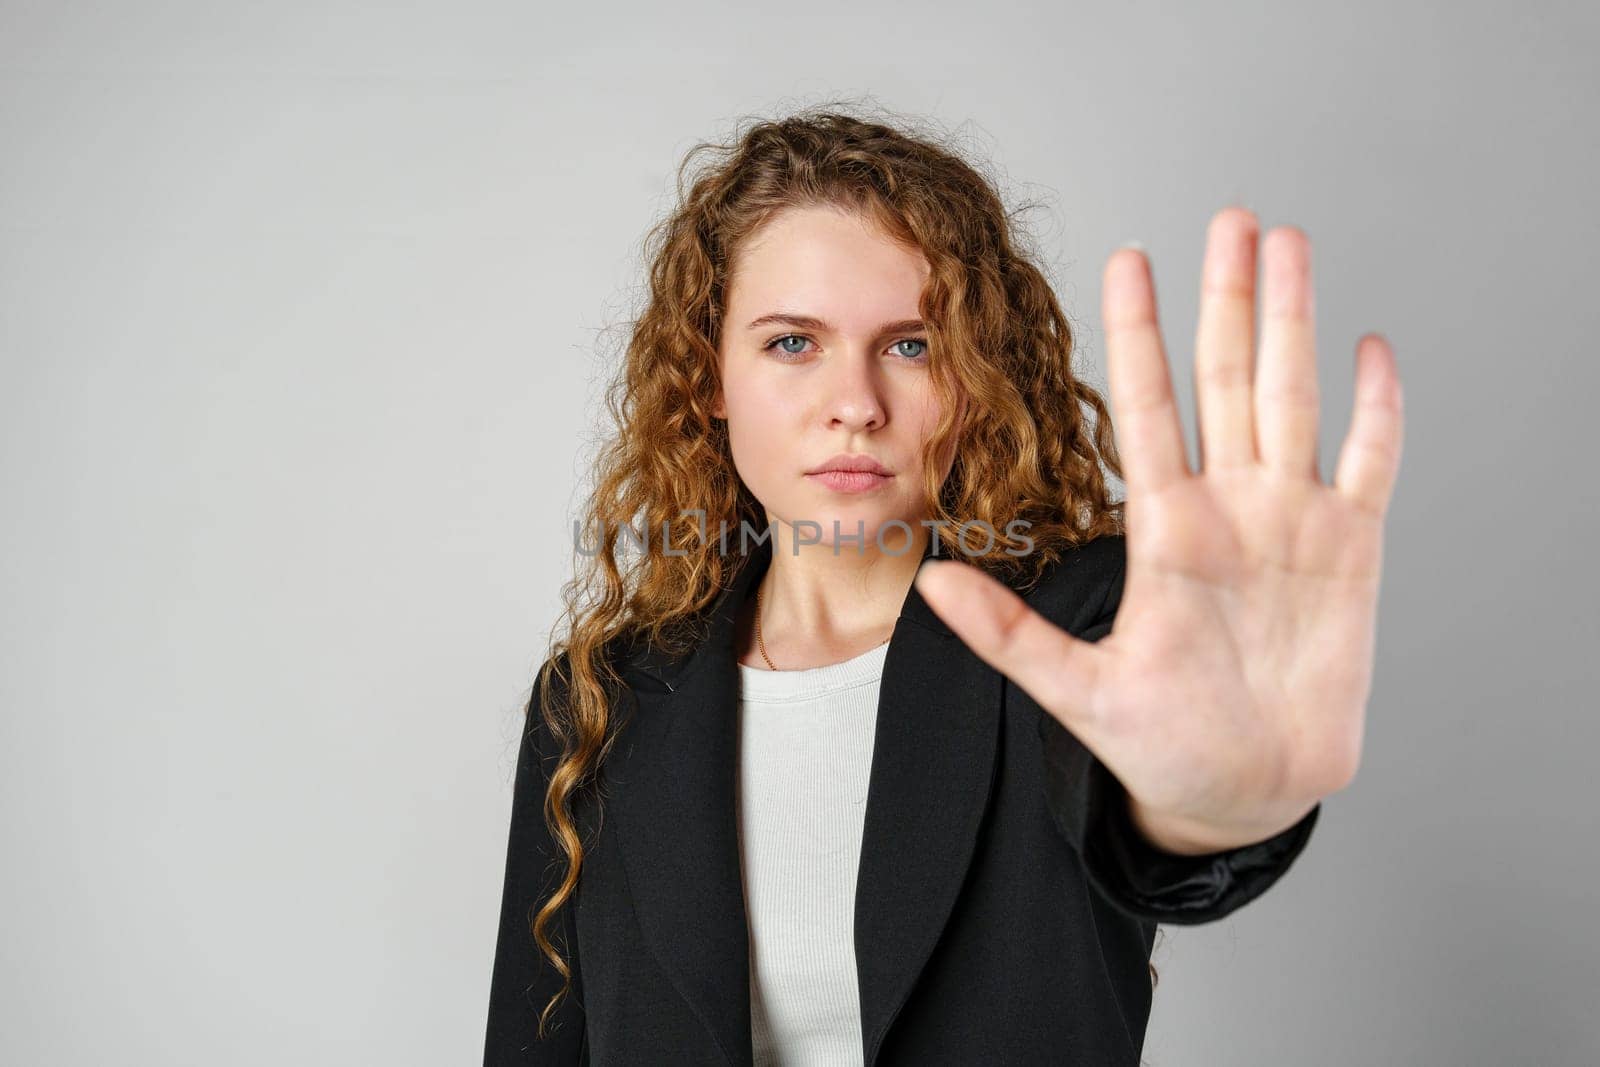 Woman With Curly Hair Holding Hand Up in Studio